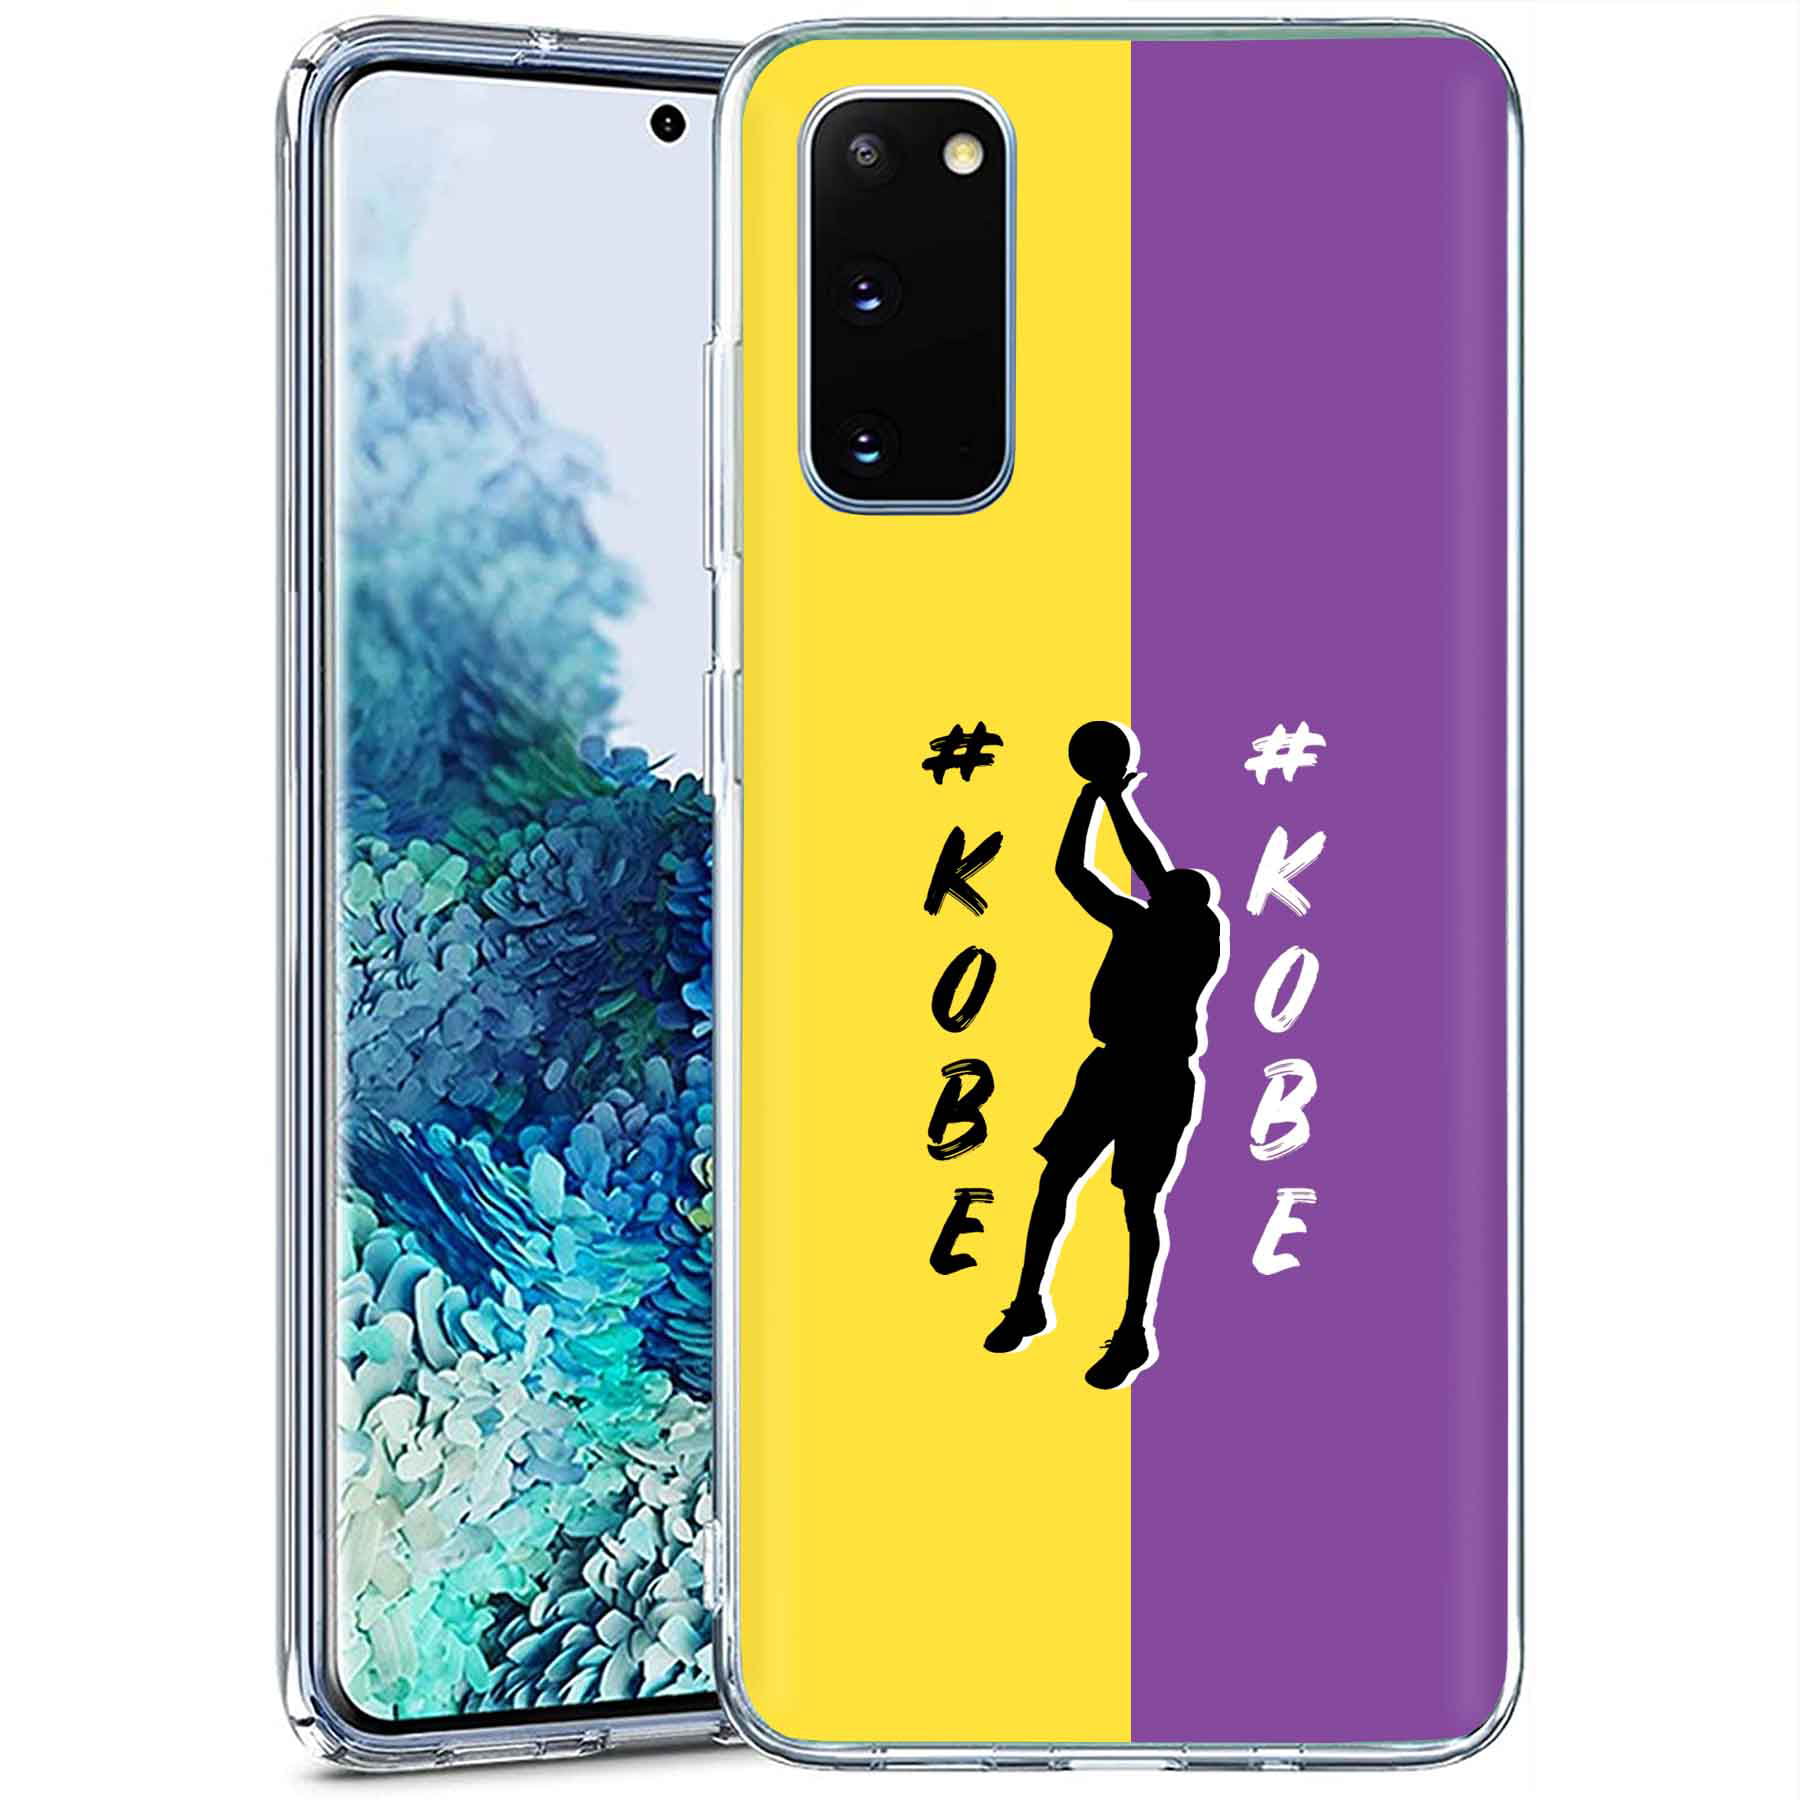 Phone Cover Case for Samsung Galaxy S20 FE 4G5G,Not S20SM-G780F,Kobe Basketball Print,Light Weight,Flexible,Soft Touch Cover,Anti-Scratch